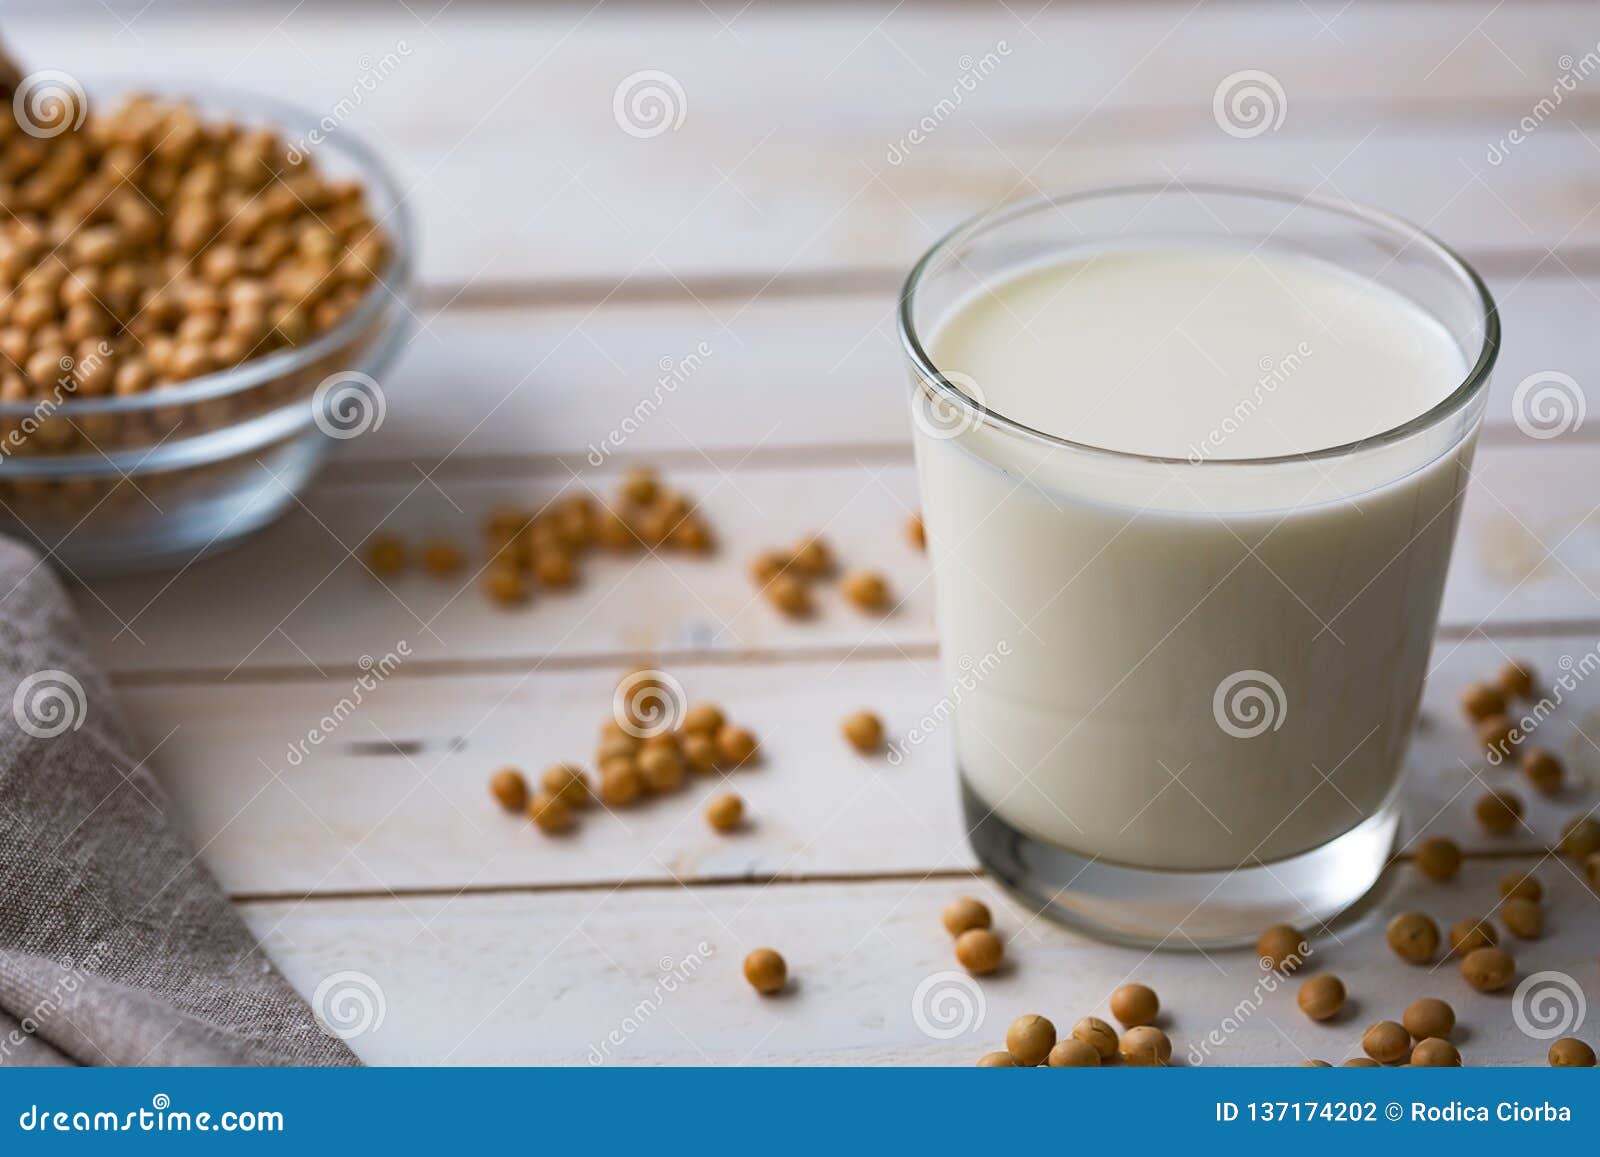 Raw Soy Seeds And Glass Of Milk On Slate Background ...